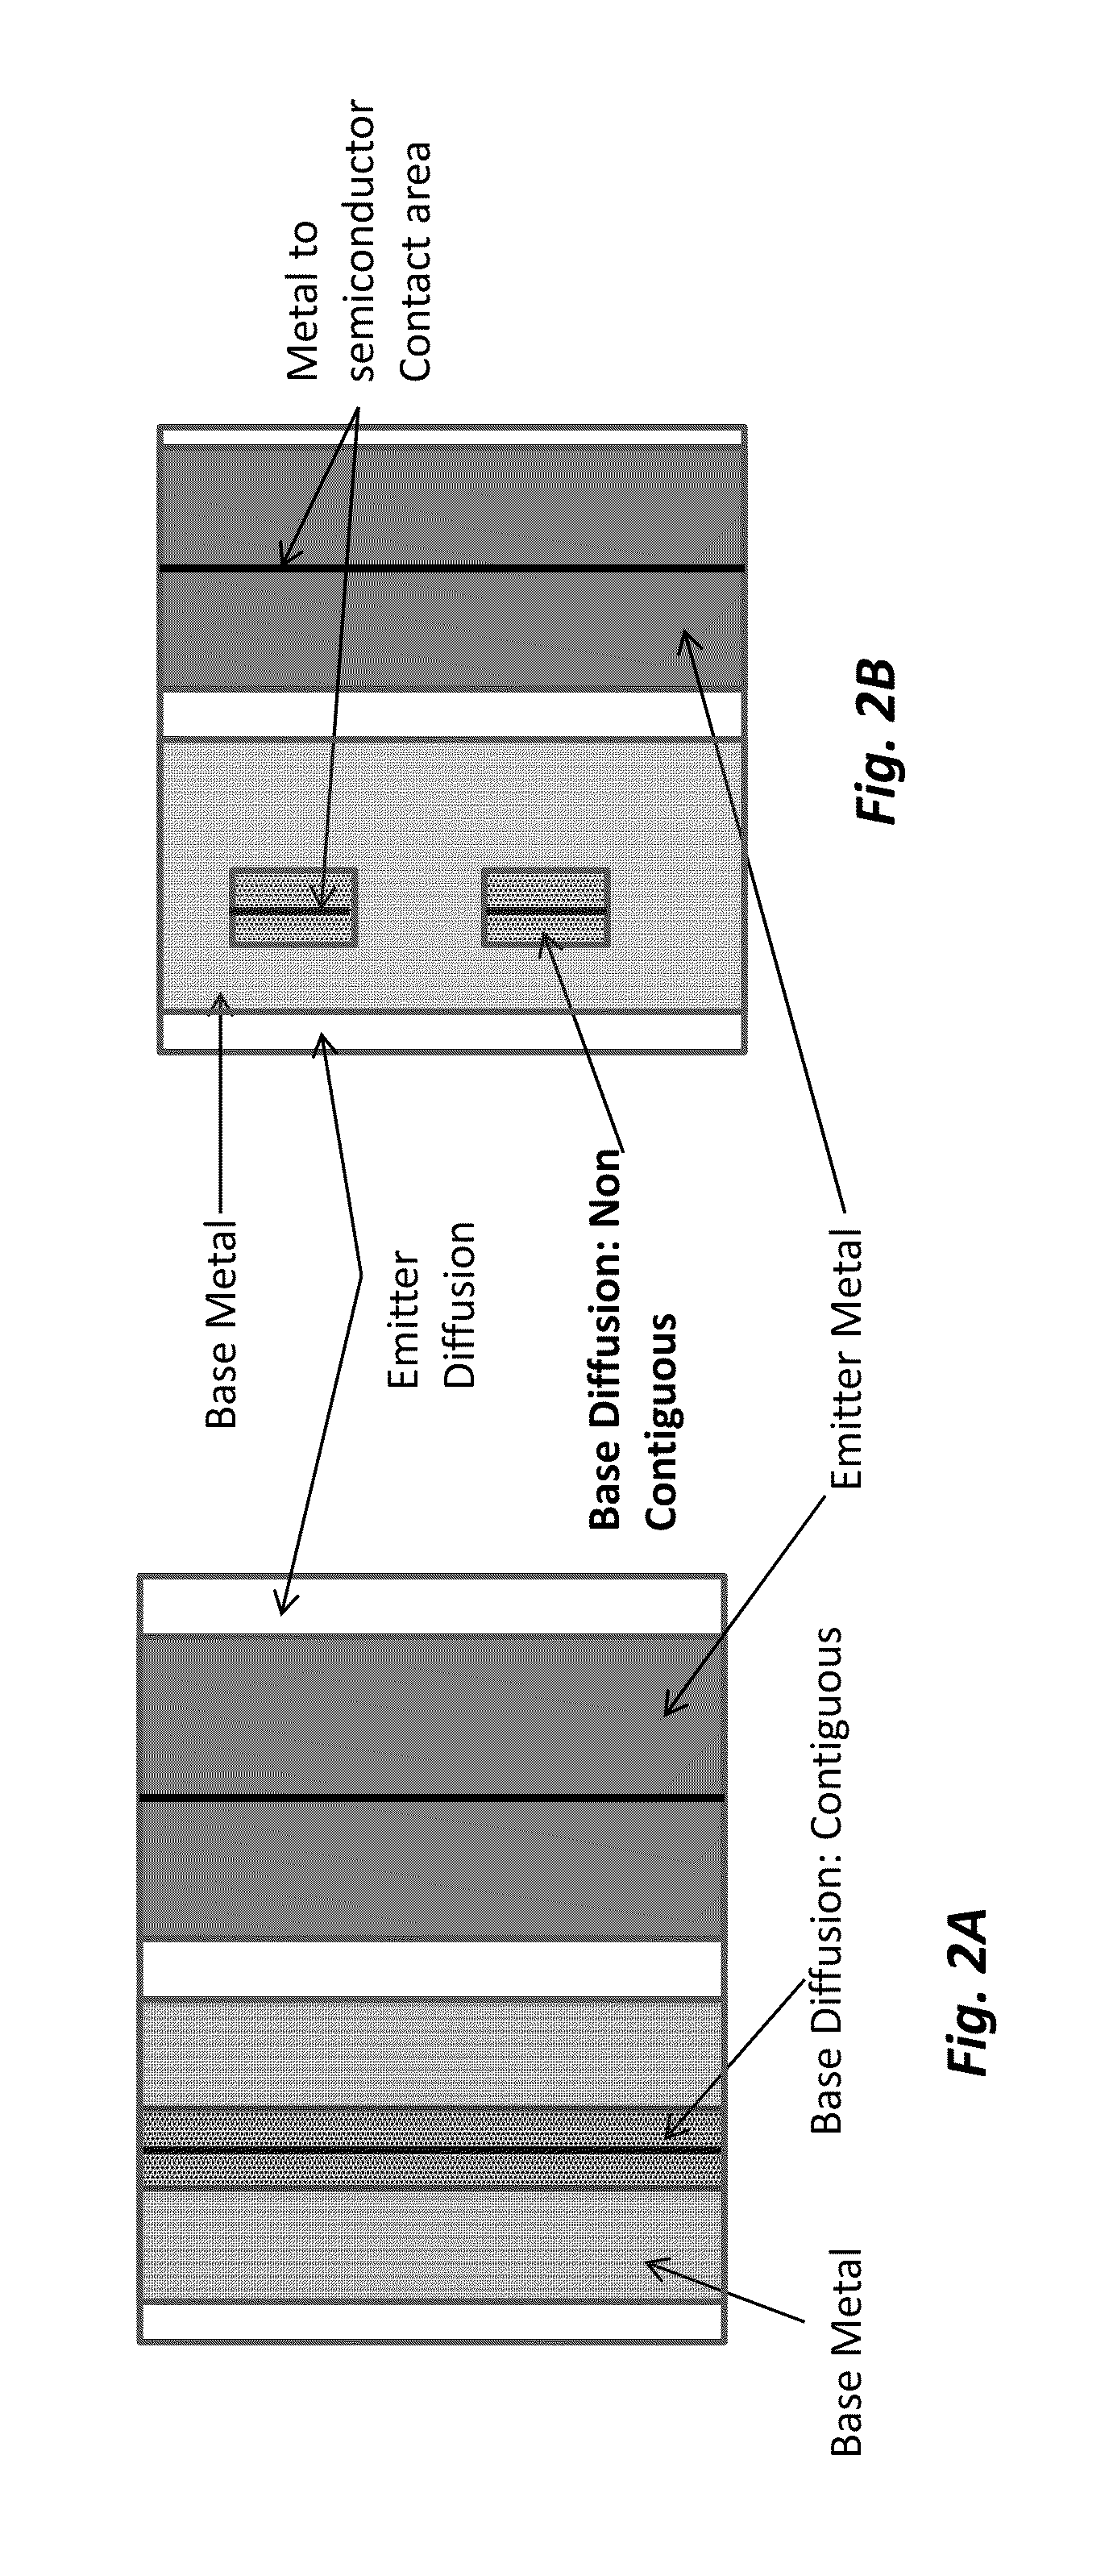 Structures and methods of formation of contiguous and non-contiguous base regions for high efficiency back-contact solar cells